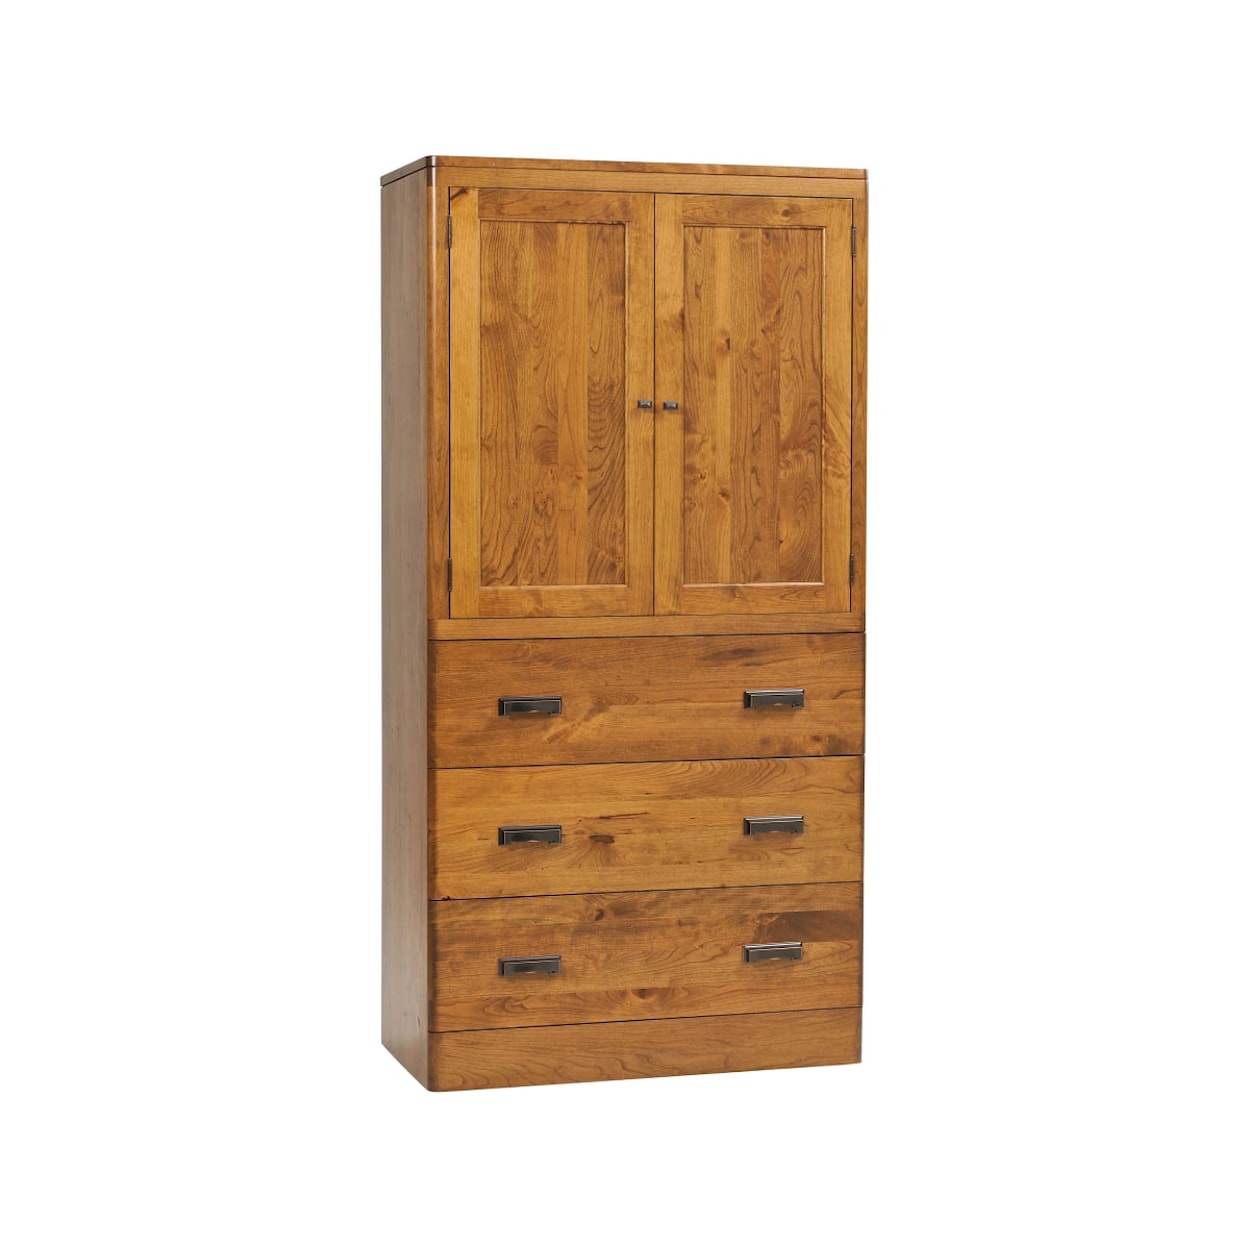 Millcraft Crossan 3-Drawer Bedroom Armoire